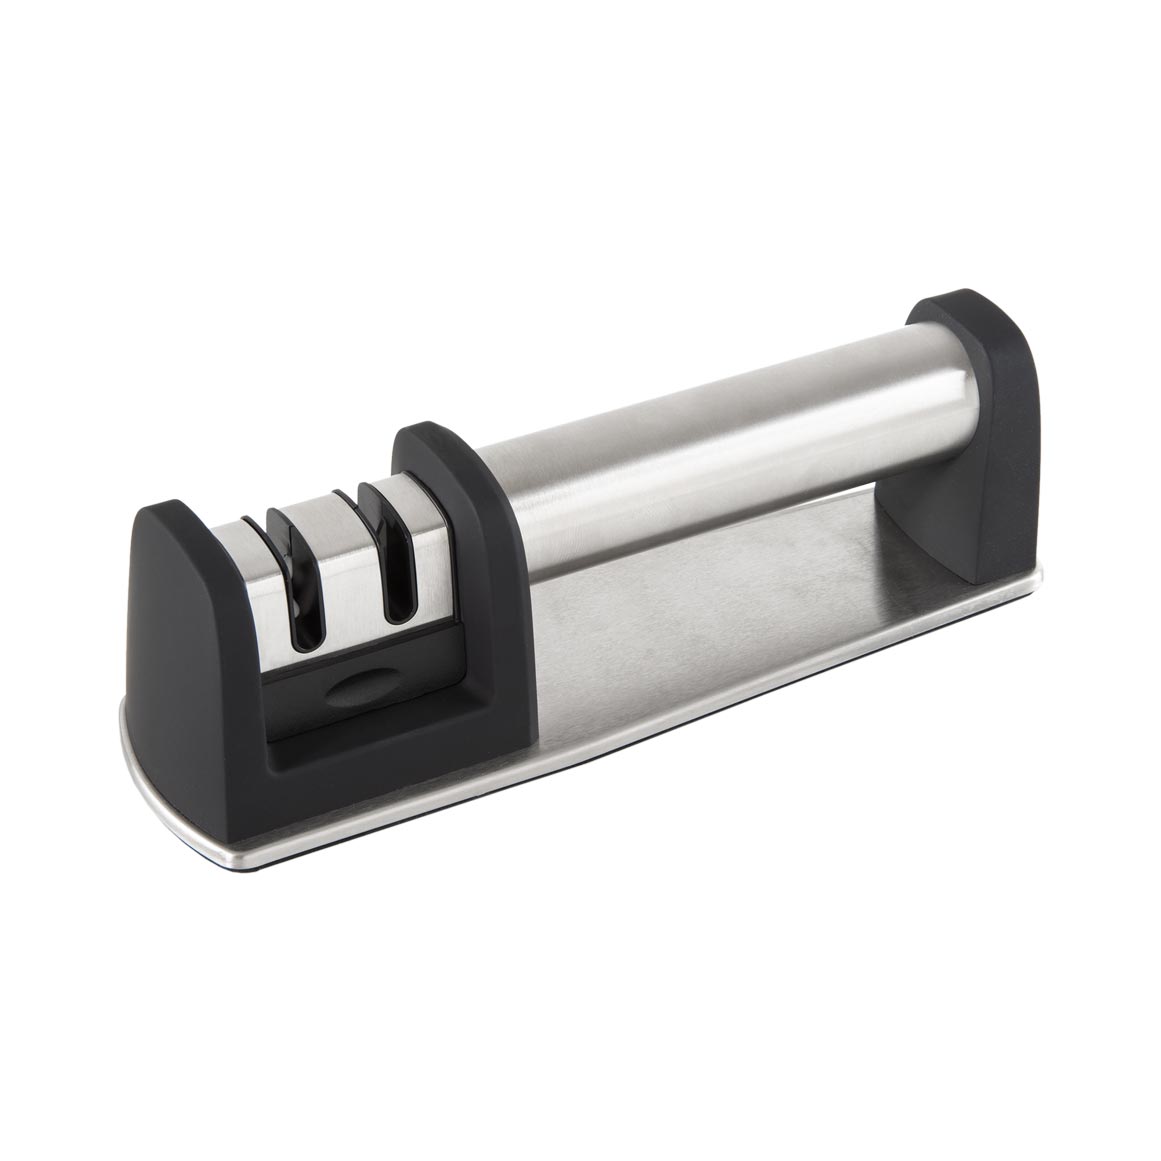 Stainless Steel Knife Sharpener | Woolworths.co.za